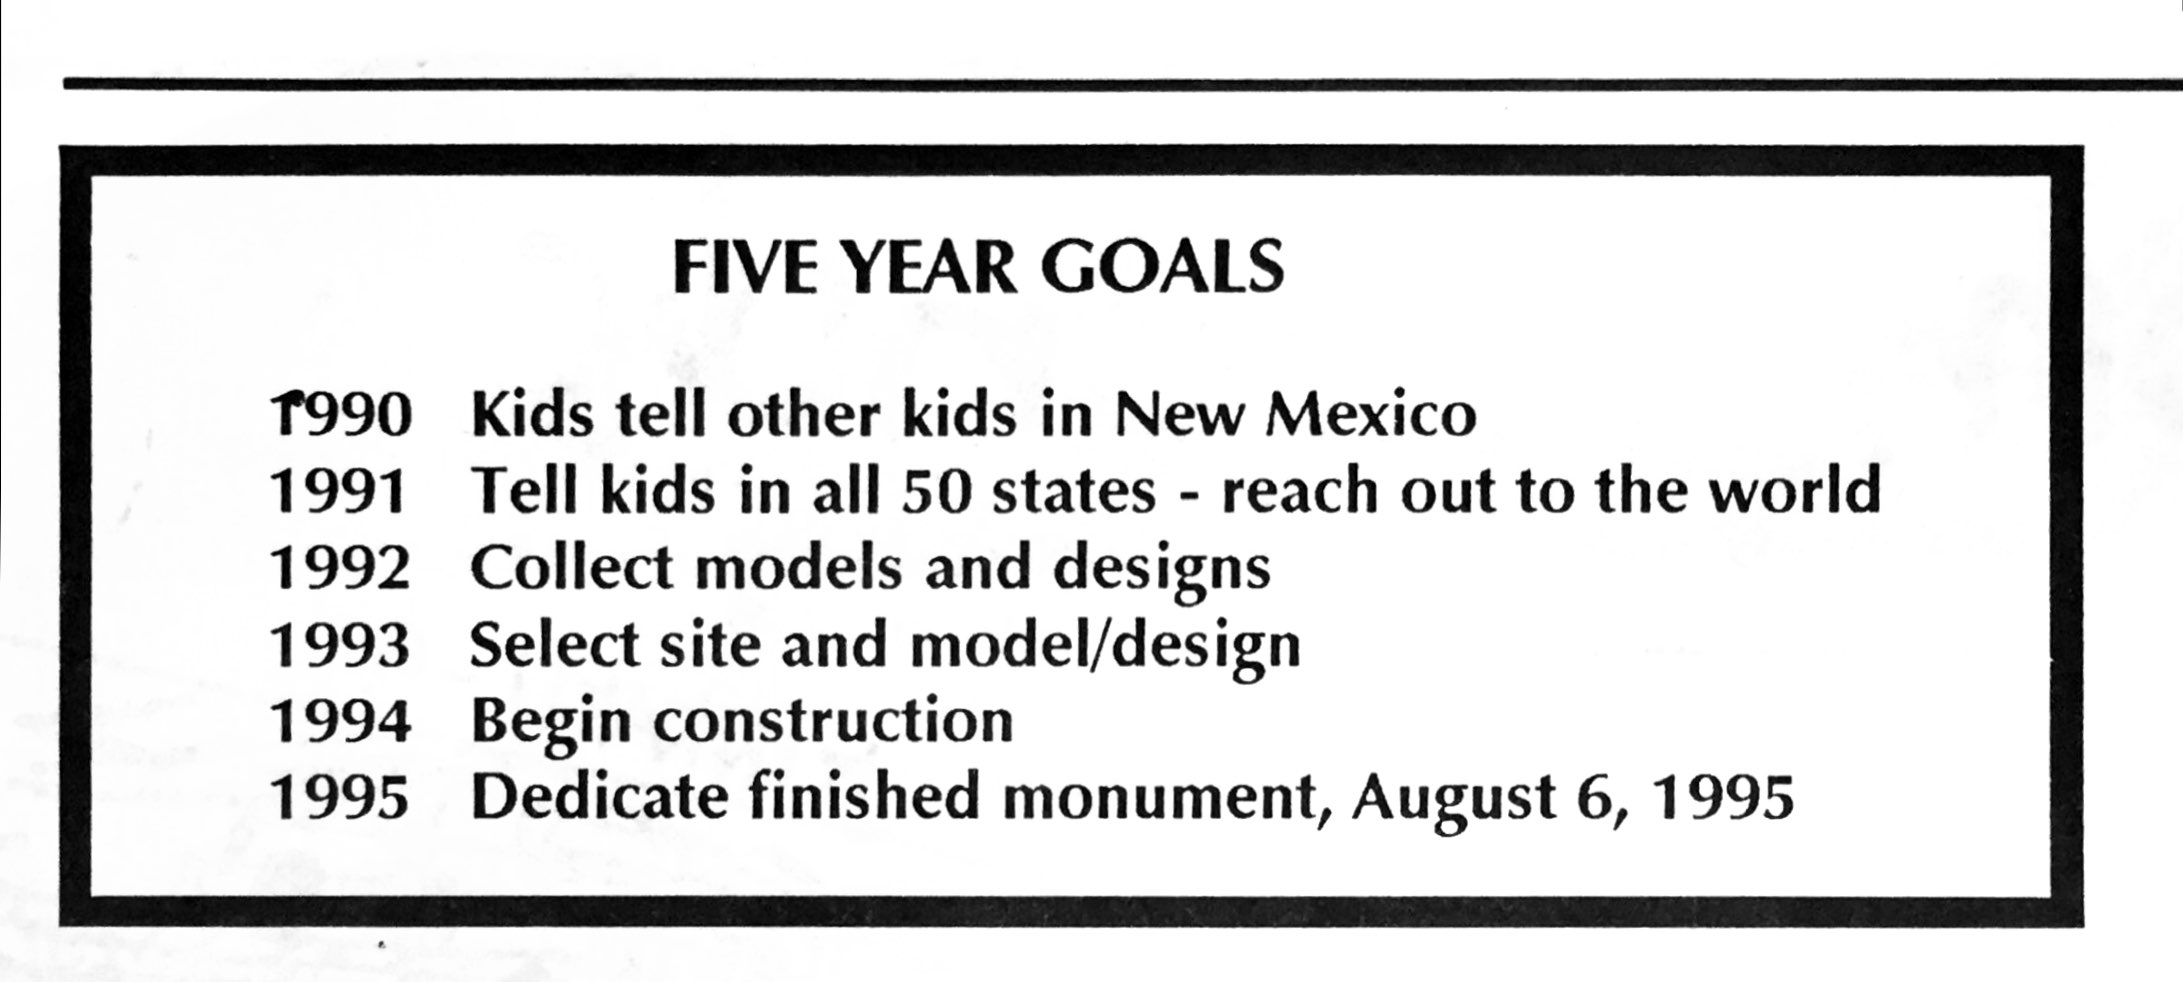 List of yearly goals, such as telling other kids in New Mexico and collecting models and designs.